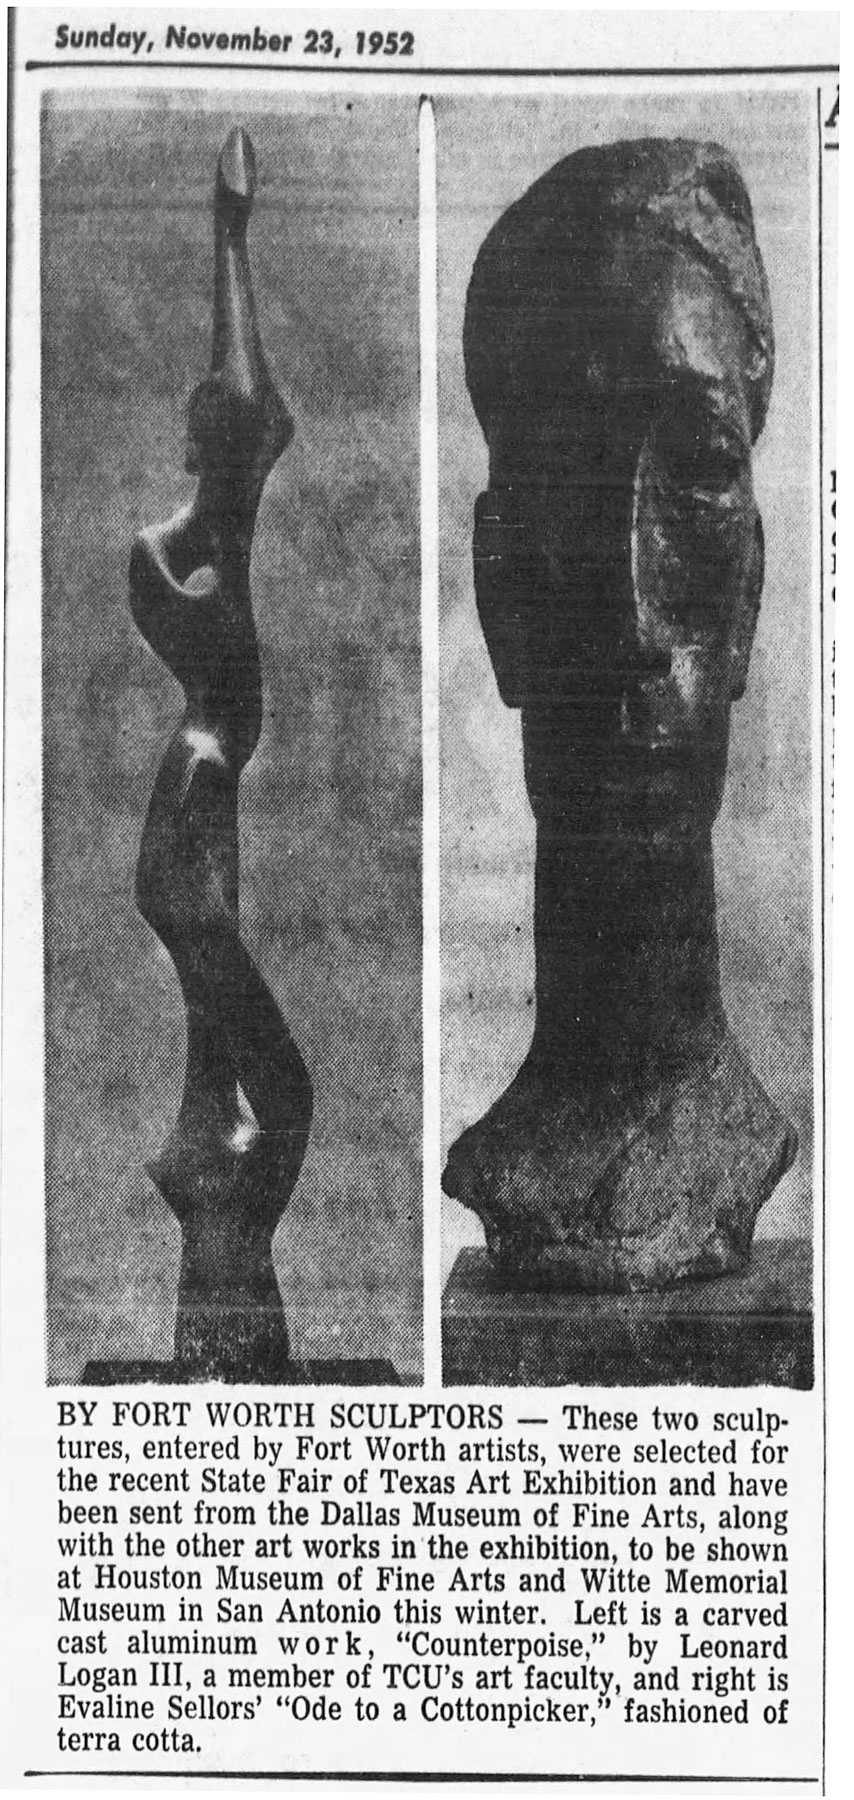 A newspaper clipping showing two photos of sculptures with text explaining where they will be exhibited.